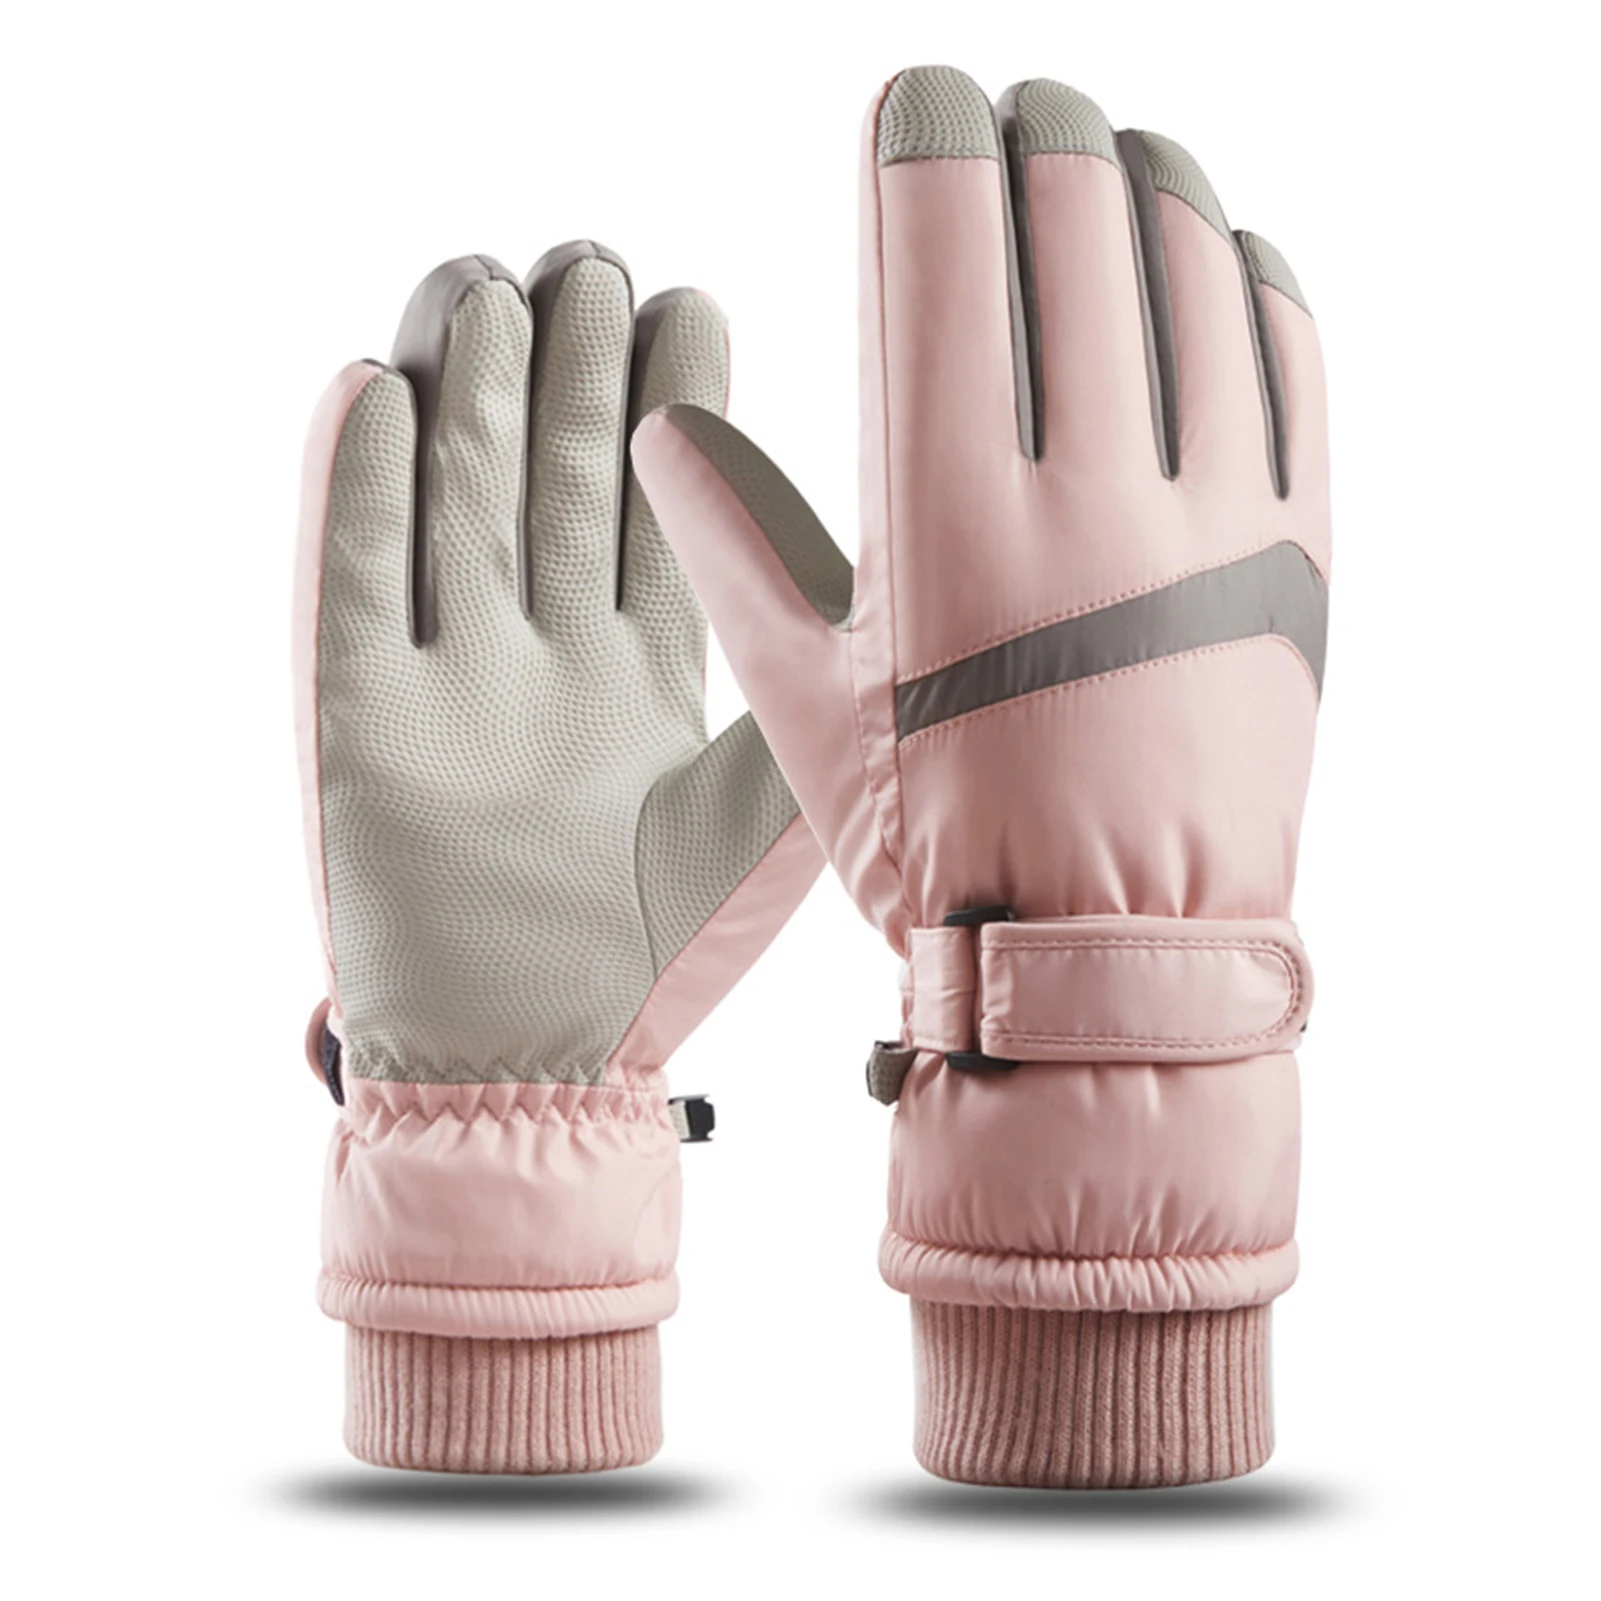 

Winter Snowboard Ski Gloves Breathable Waterproof Touchscreen-ready Design for Sport Office Outside Business